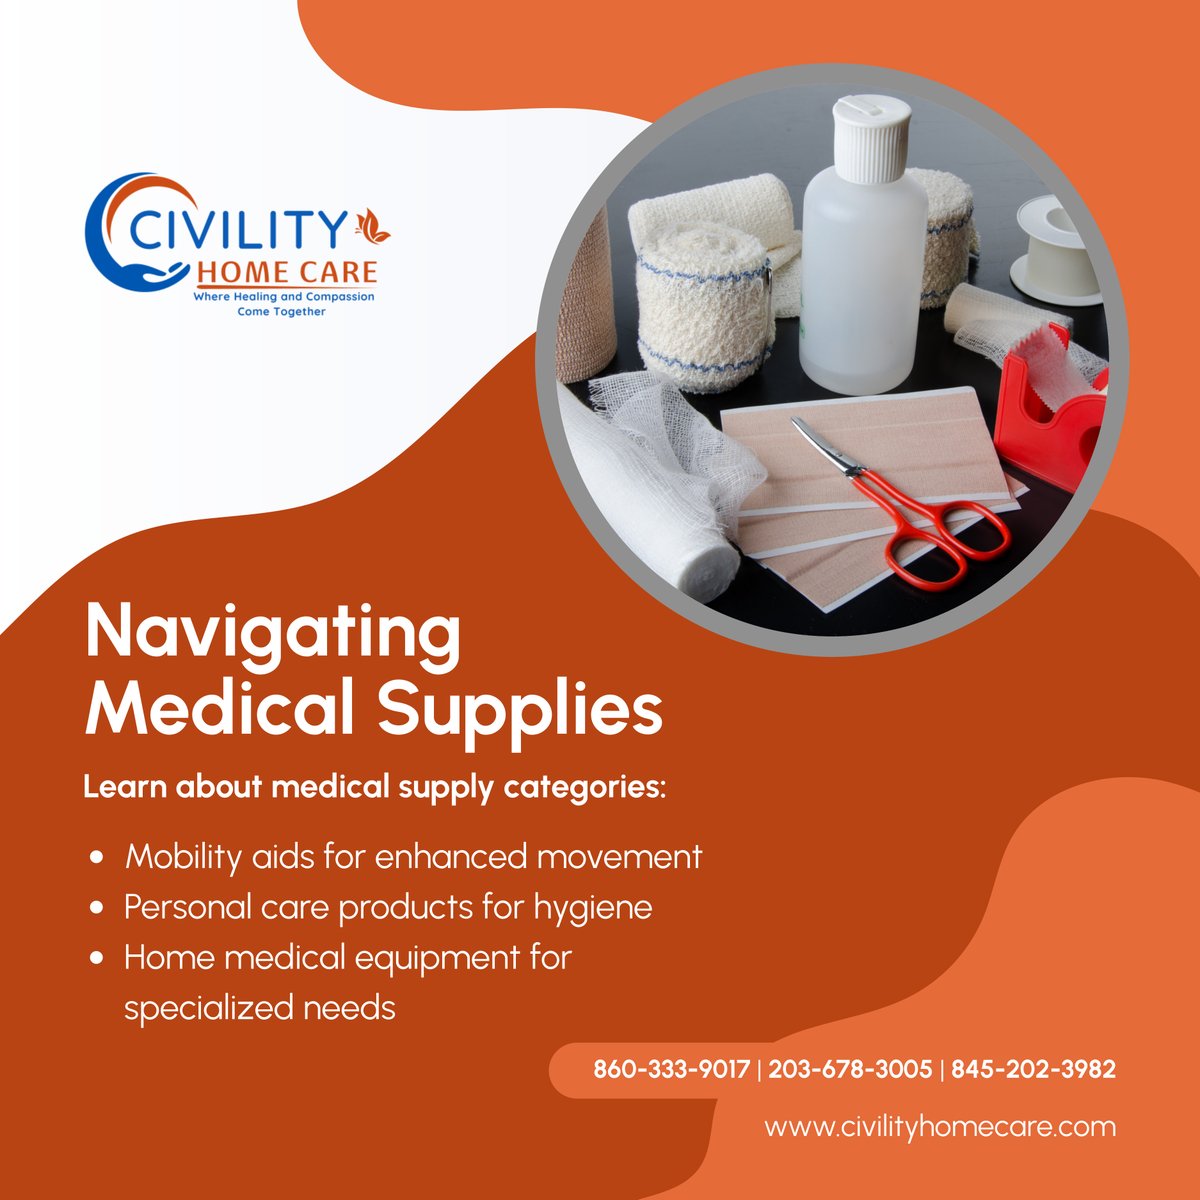 Understanding medical supply categories empowers better management of health needs. 

Explore the options available to support your well-being. 

#BrewsterNY #HomeCareAndMedicalSupplies #MedicalSupplies #HealthCare #MedicalSupplyCategories